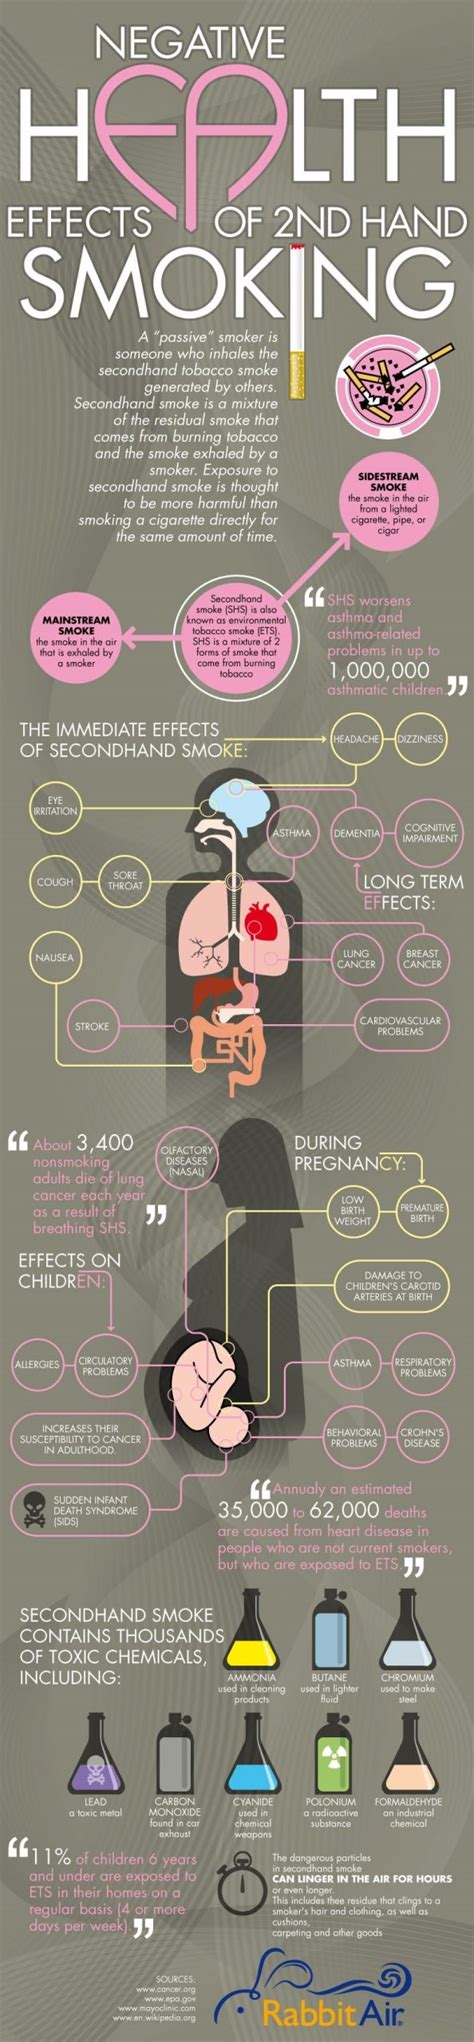 dangers of secondhand smoke [infographic] health